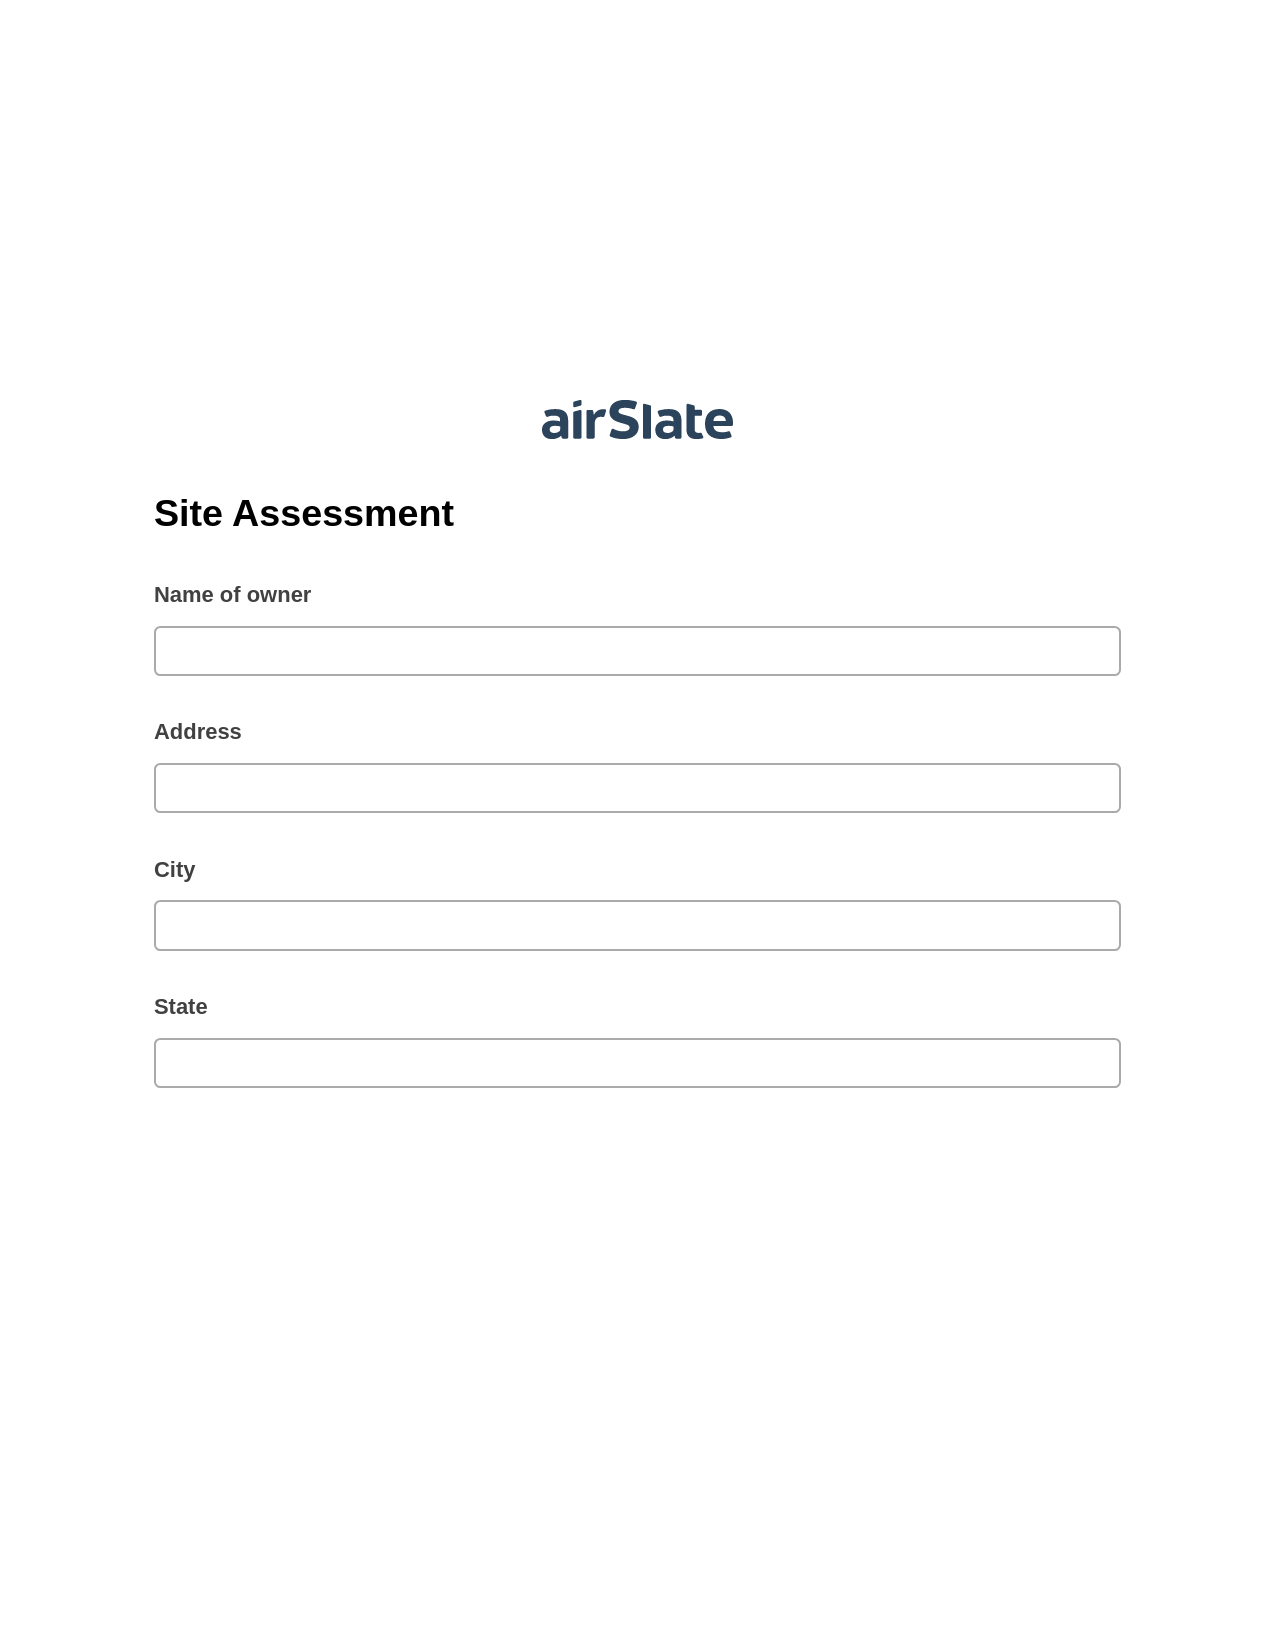 Site Assessment Pre-fill from CSV File Bot, Webhook Bot, Slack Two-Way Binding Bot